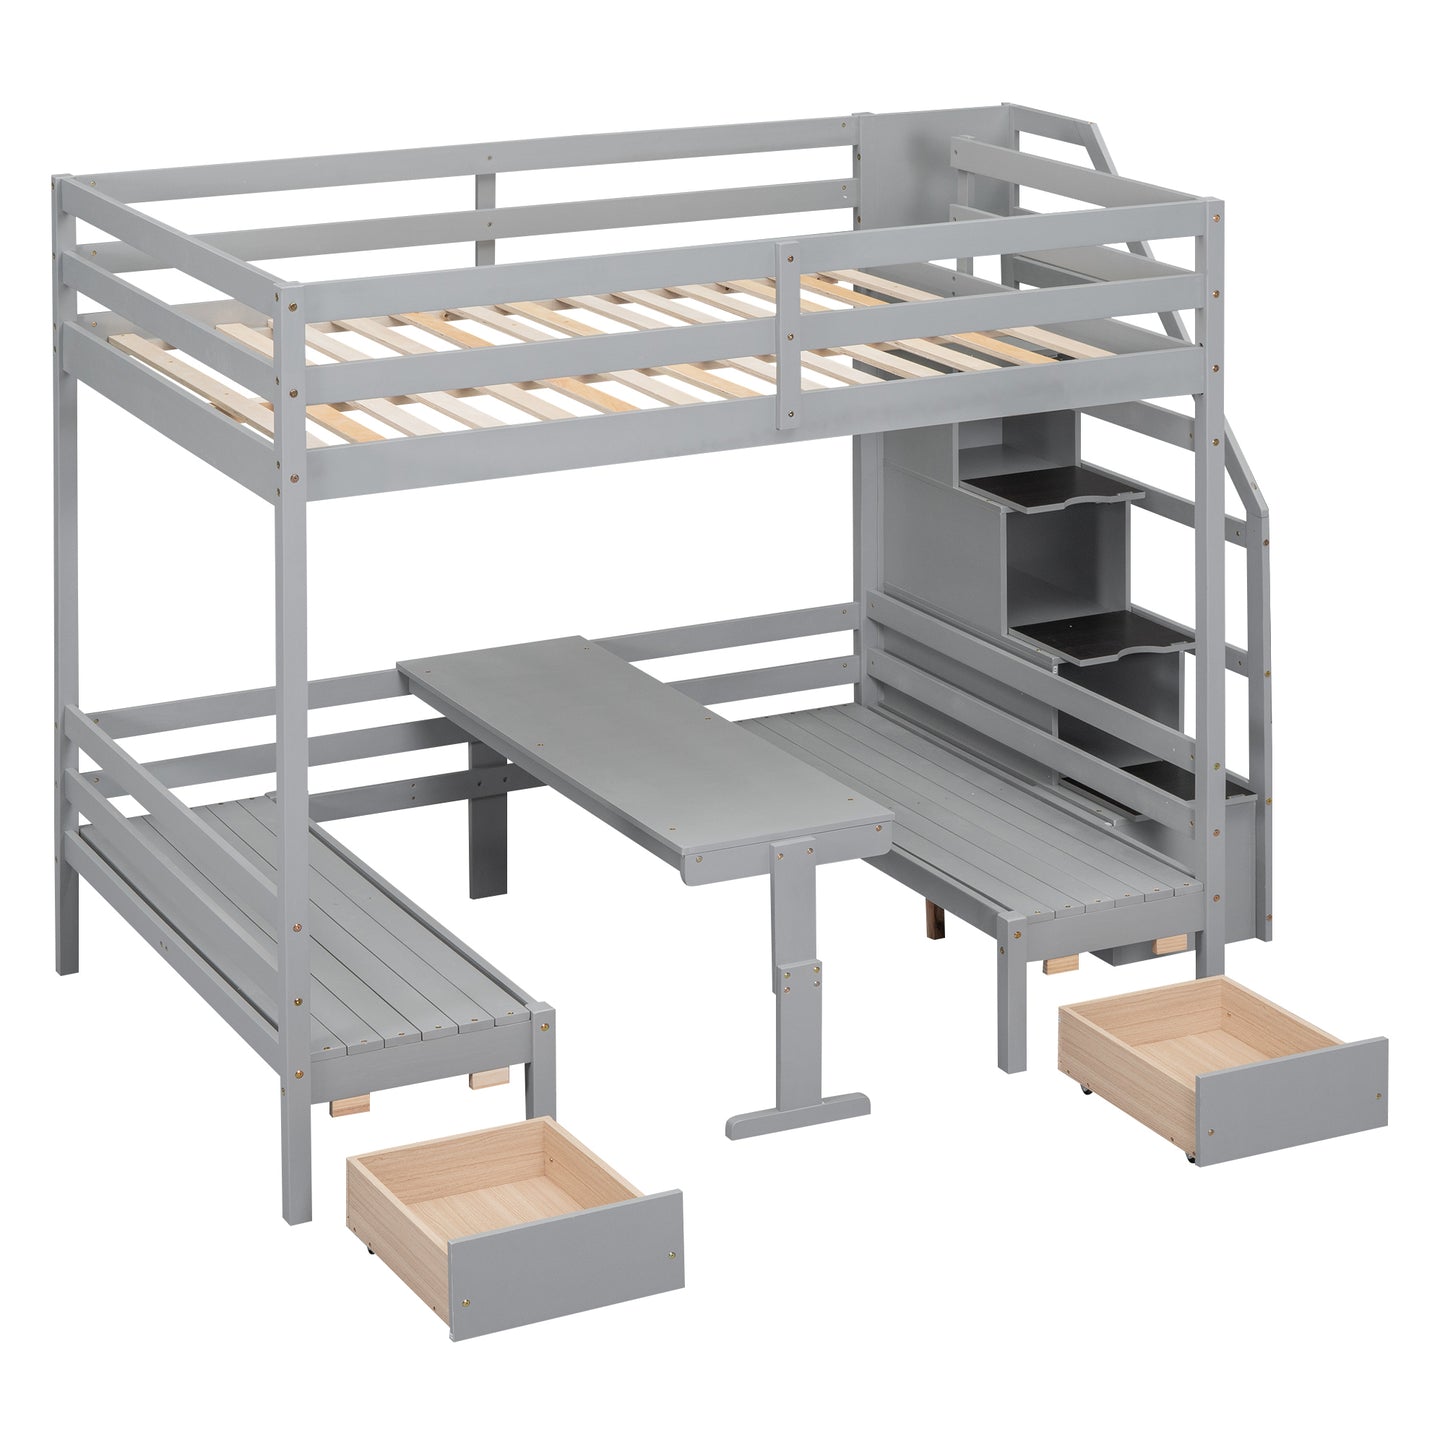 Full over Full Size Bunk with staircase,the Down Bed can be Convertible to Seats and Table Set,Gray